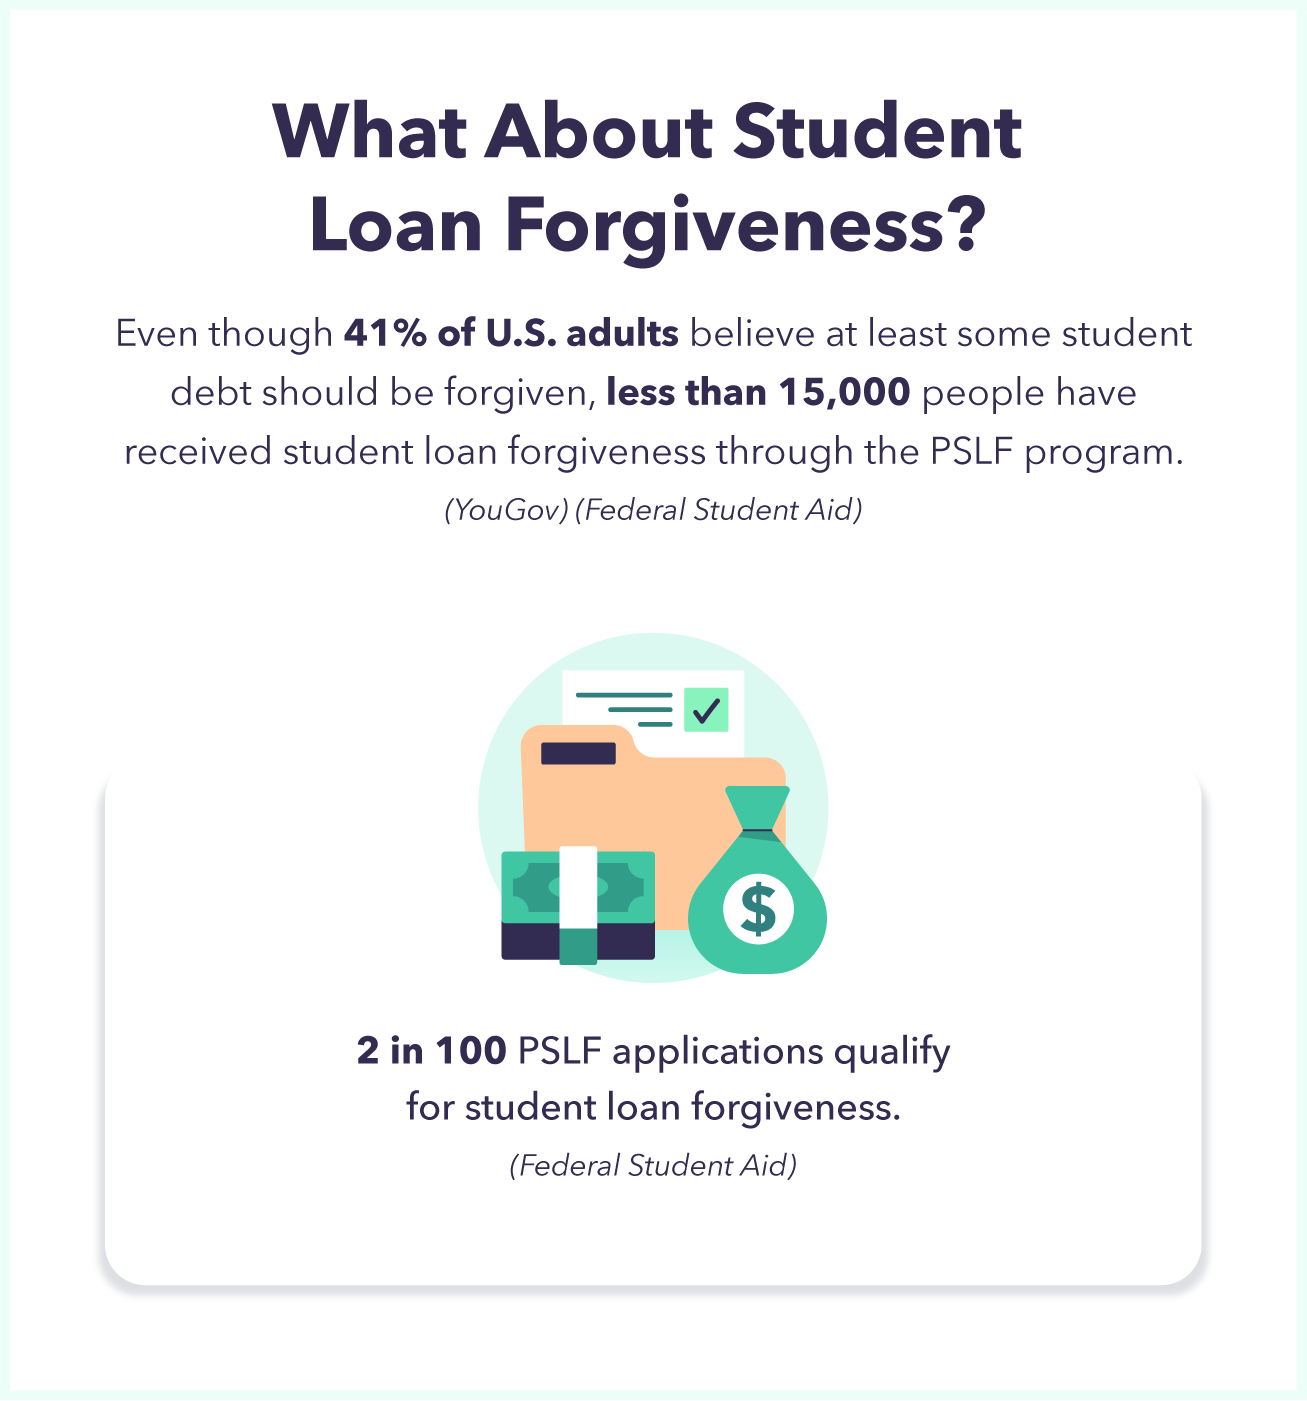 A graphic calls out specific student loan debt statistics relating to student loan forgiveness.